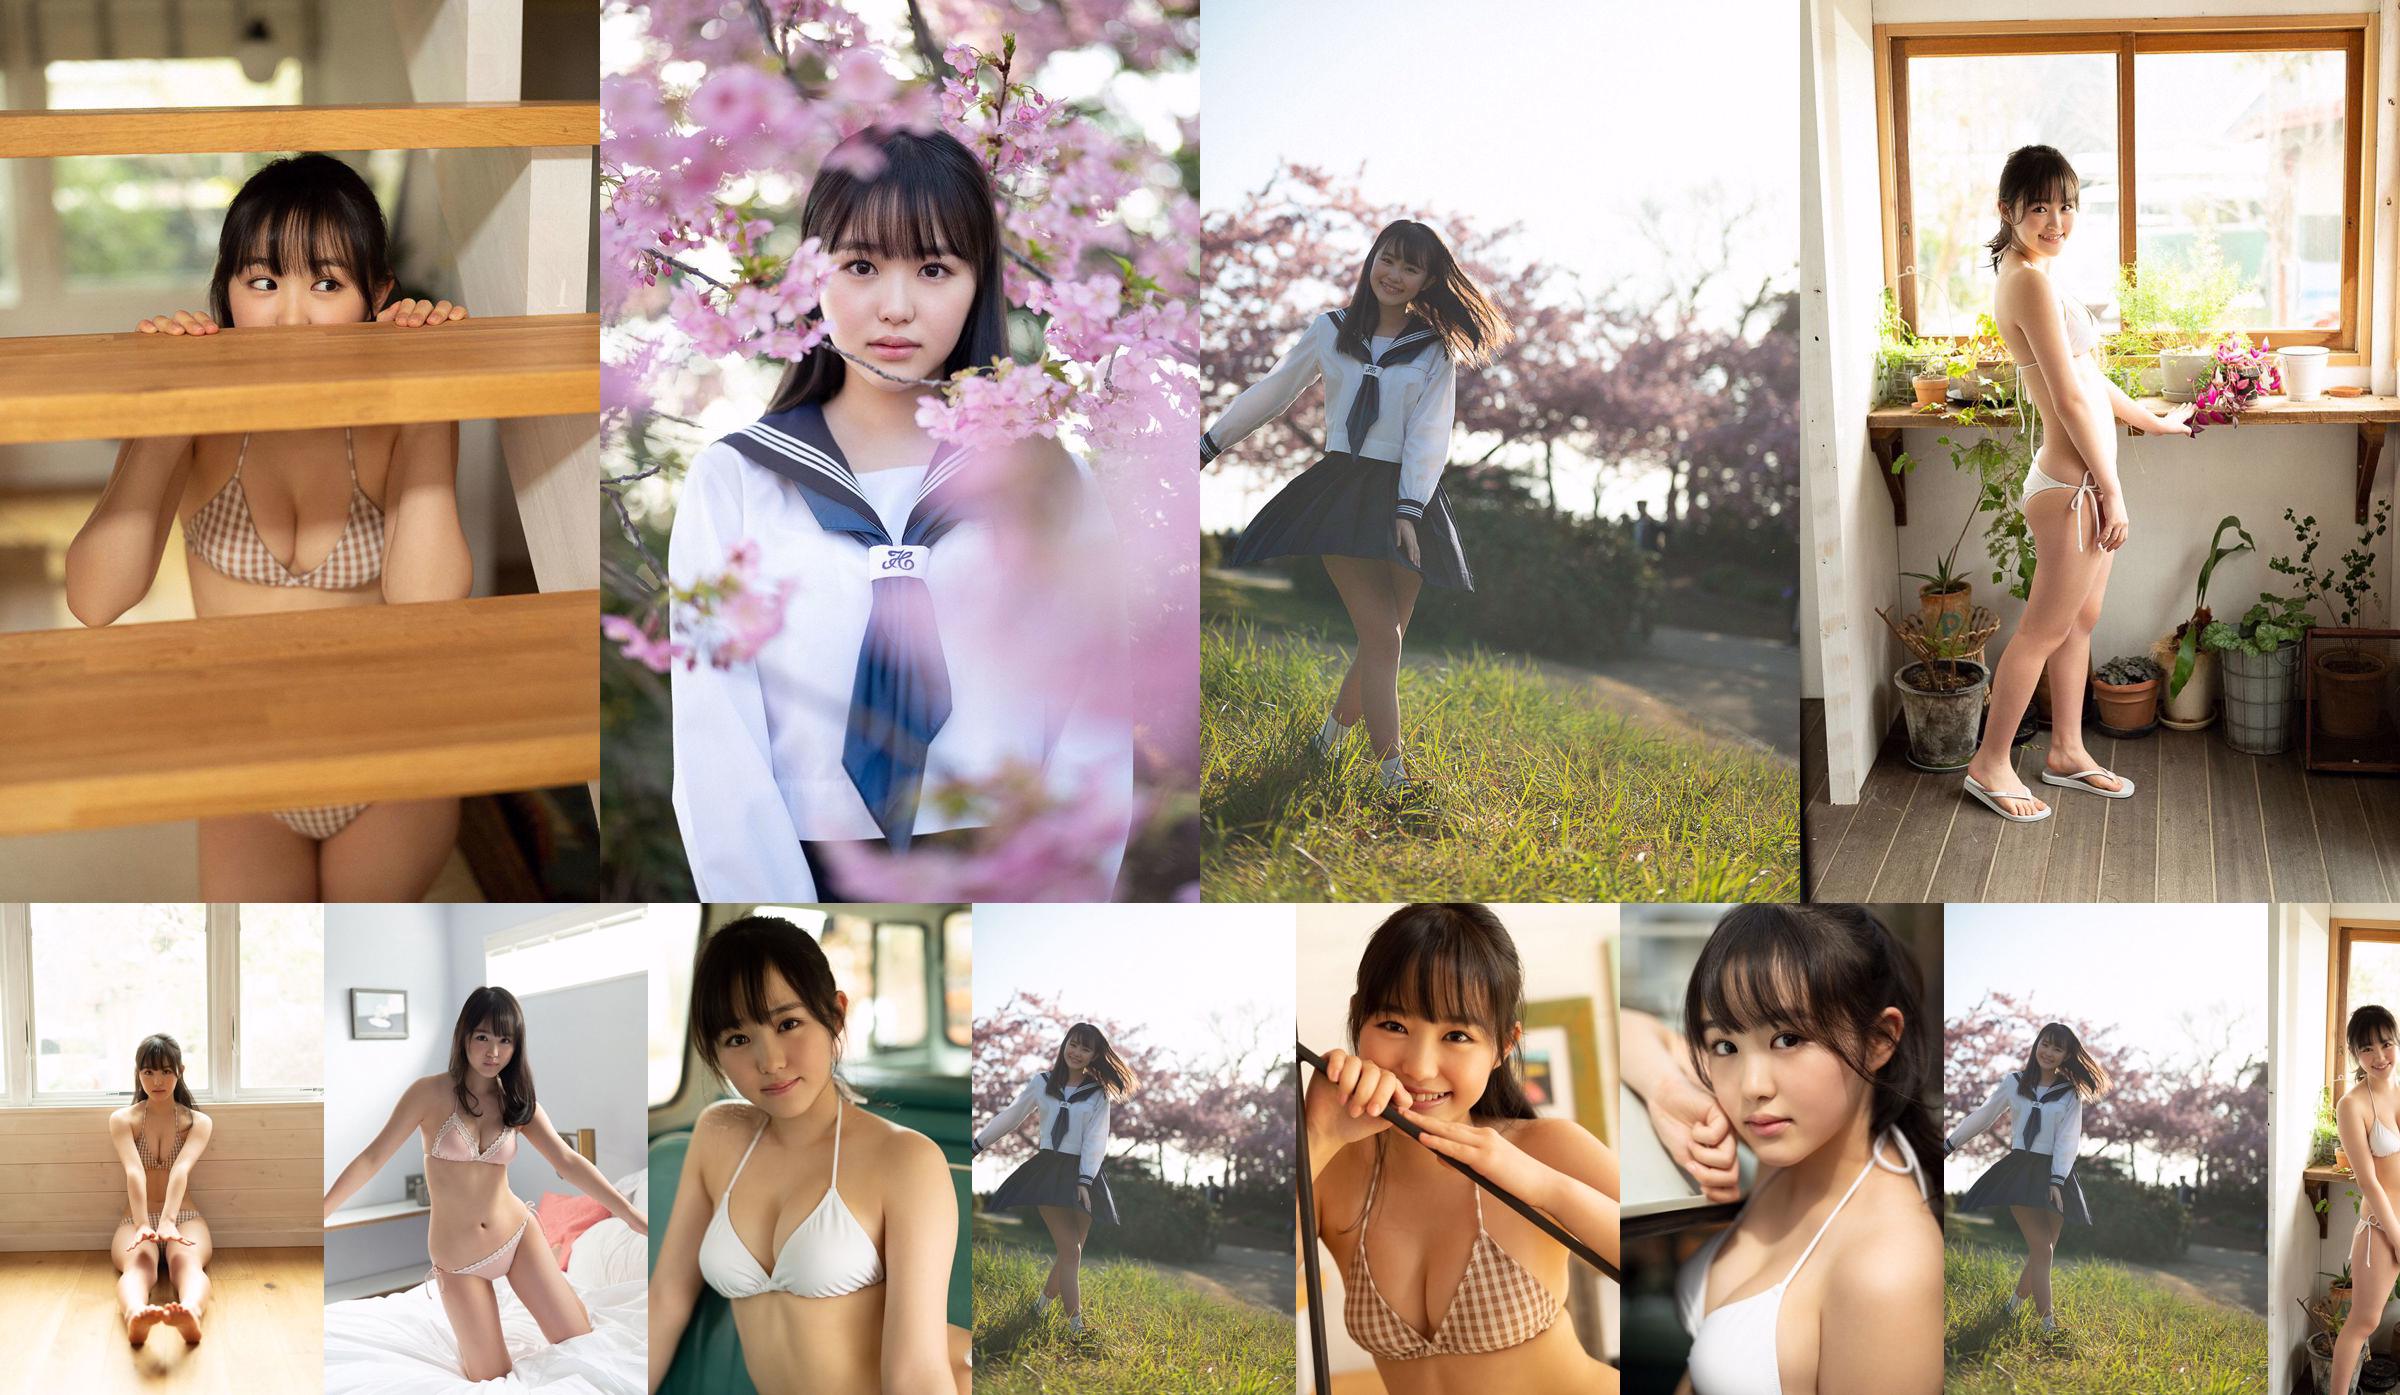 Koharu Ito "Come in Spring." [WPB-net] EXtra810 No.44b38b Page 38